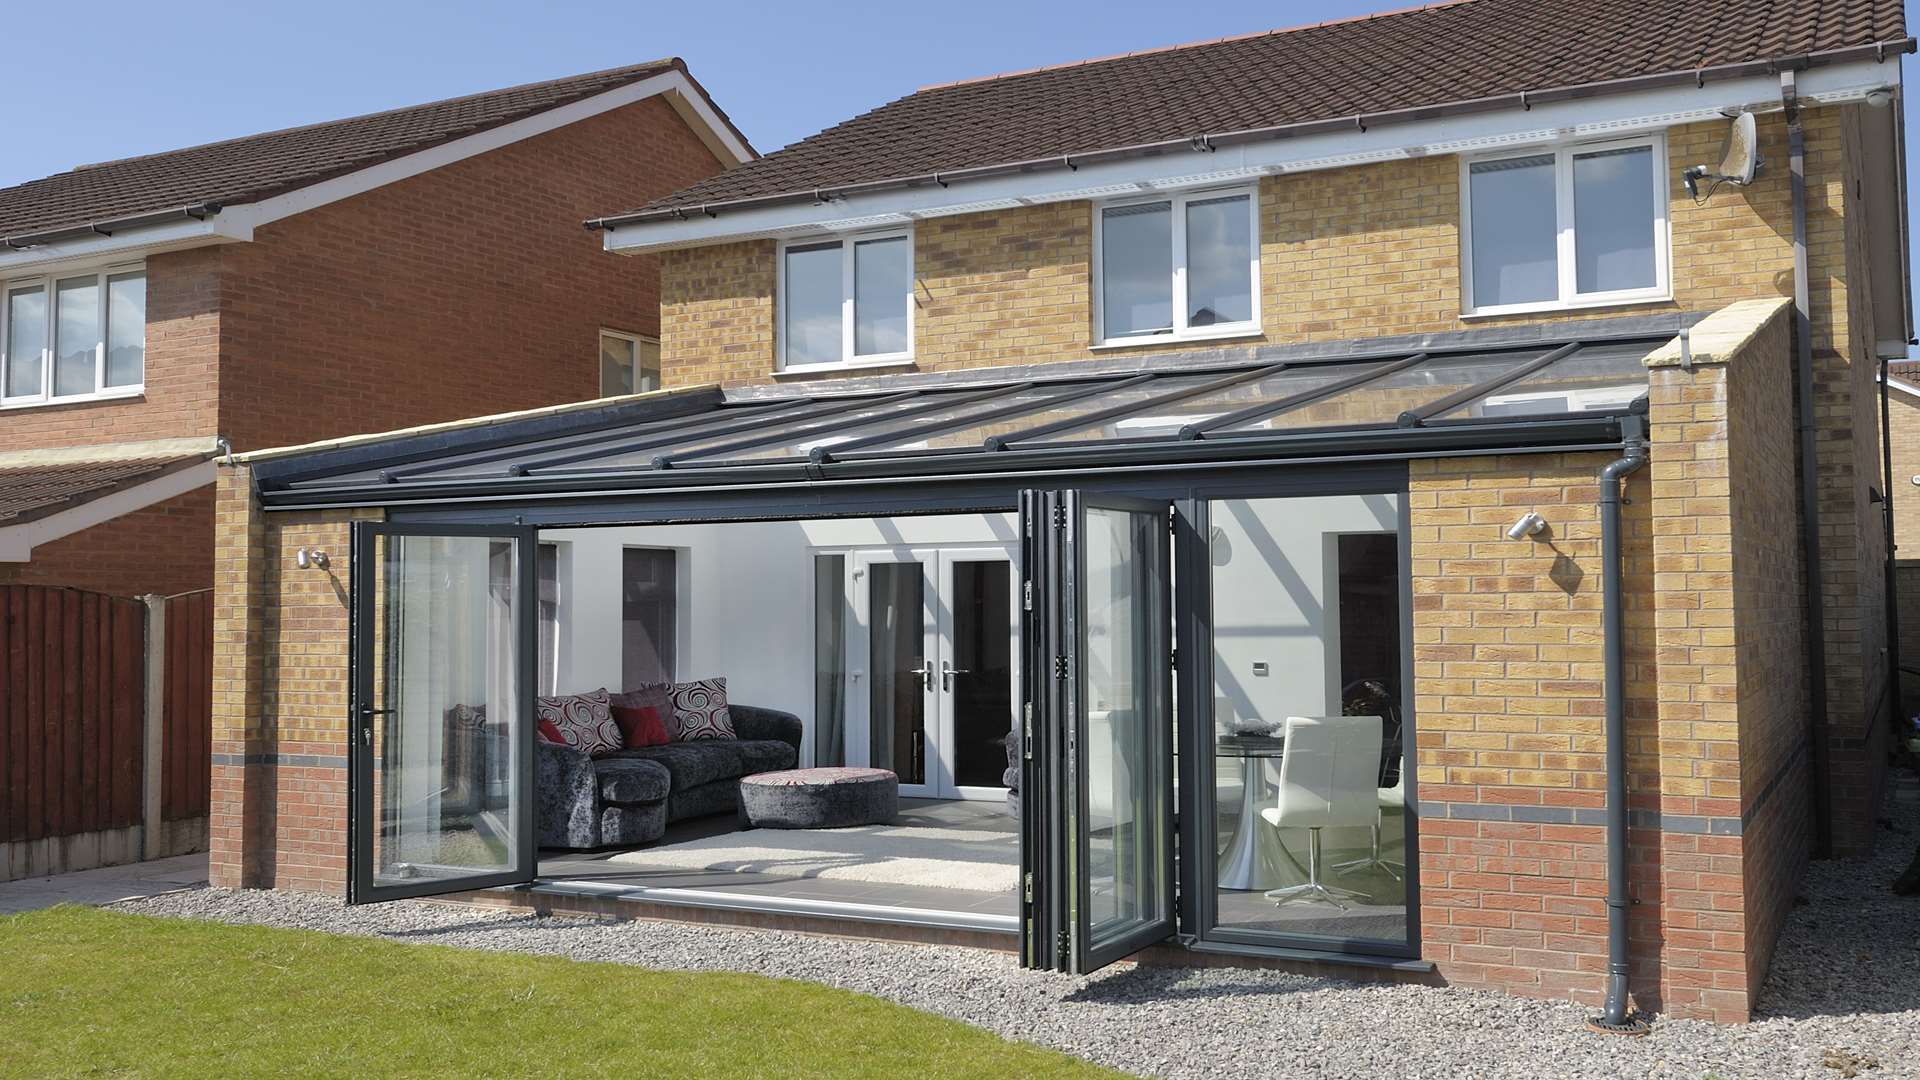 Britelite's glazed extensions can perfectly bridge the gap between home and garden